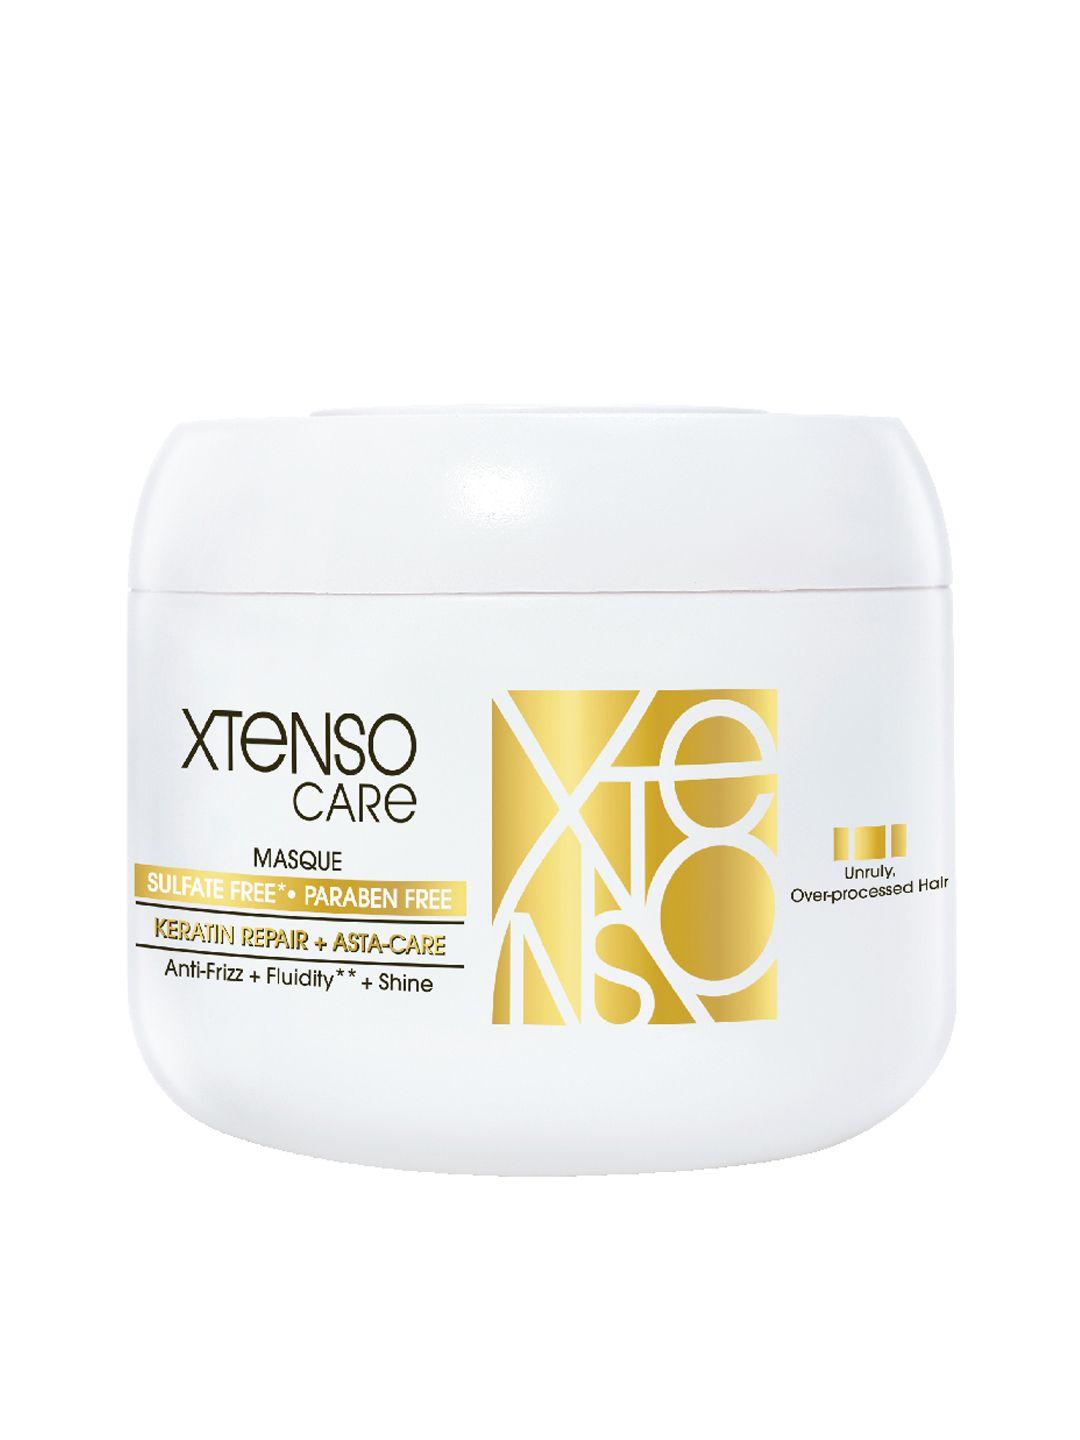 loreal-professionnel-xtenso-care-masque-with-keratin-repair-for-straightened-hair-196g